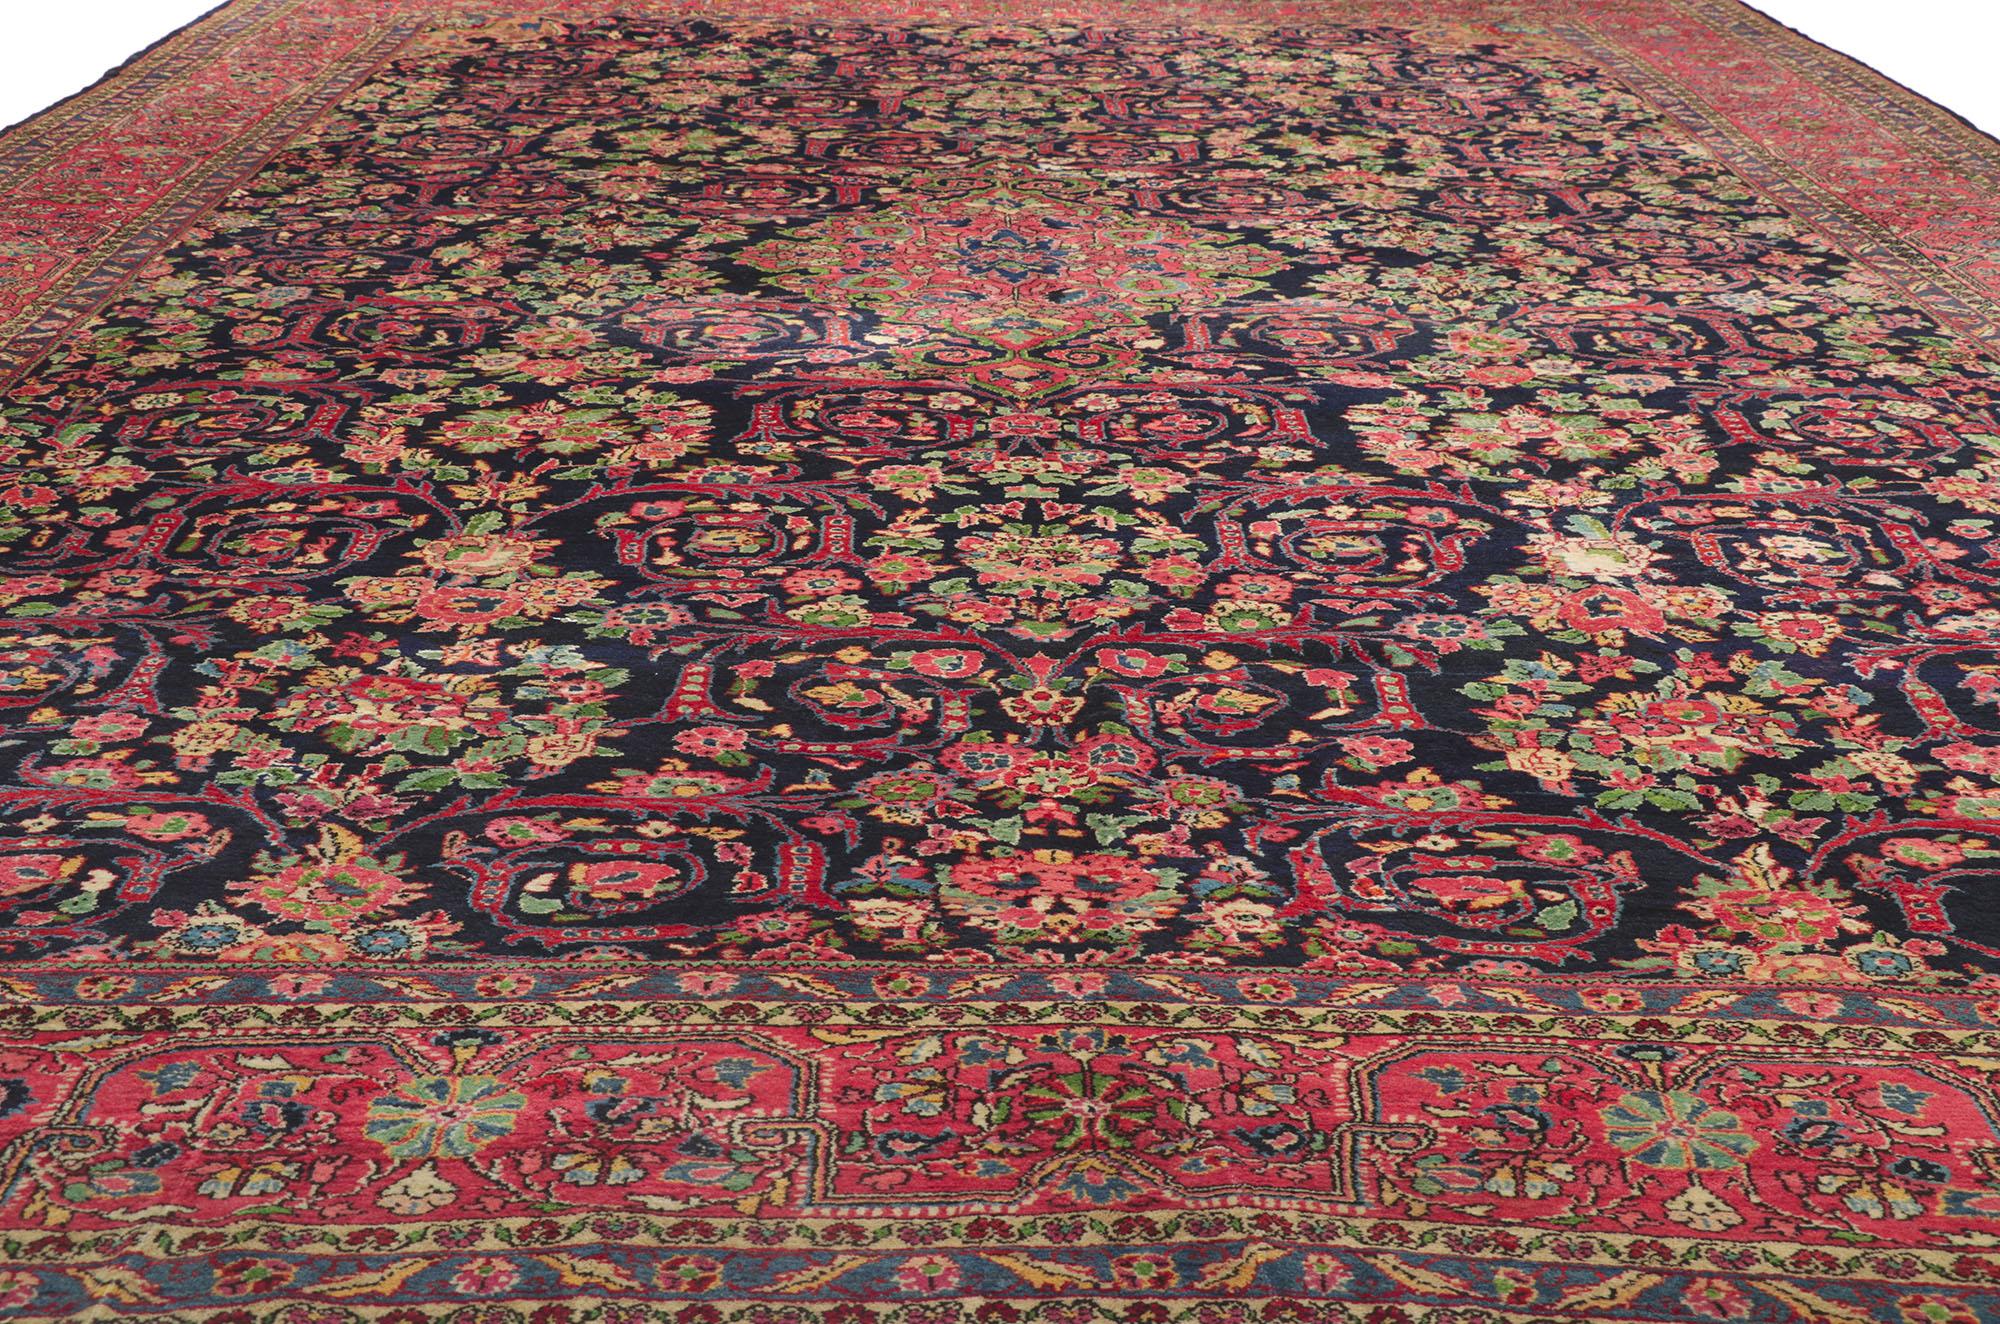 Oversized Antique Persian Malayer Rug, Classic Elegance Meets Timeless Allure In Good Condition For Sale In Dallas, TX